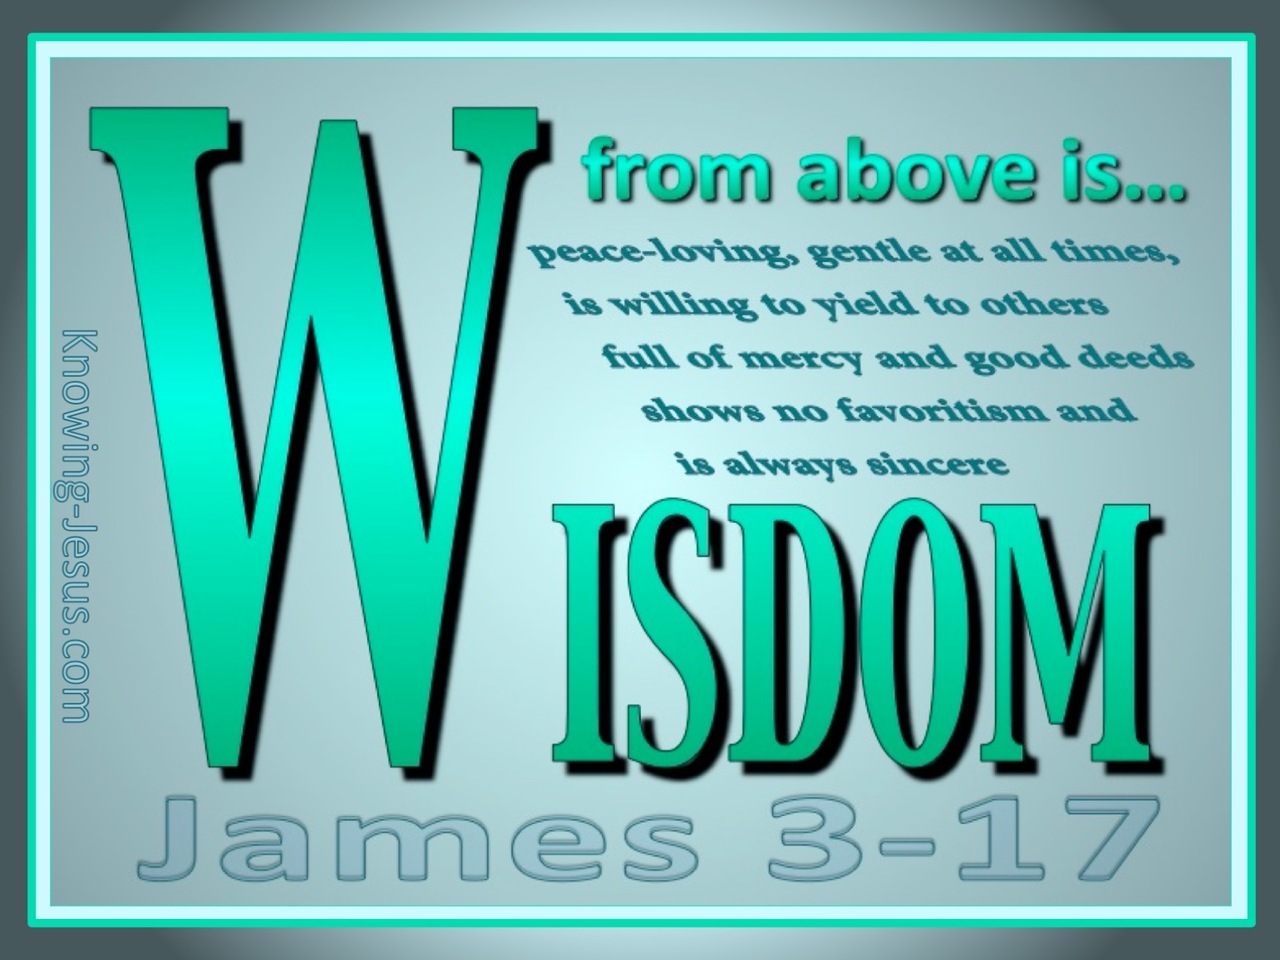 James 3:17 Wisdom From Above (green)